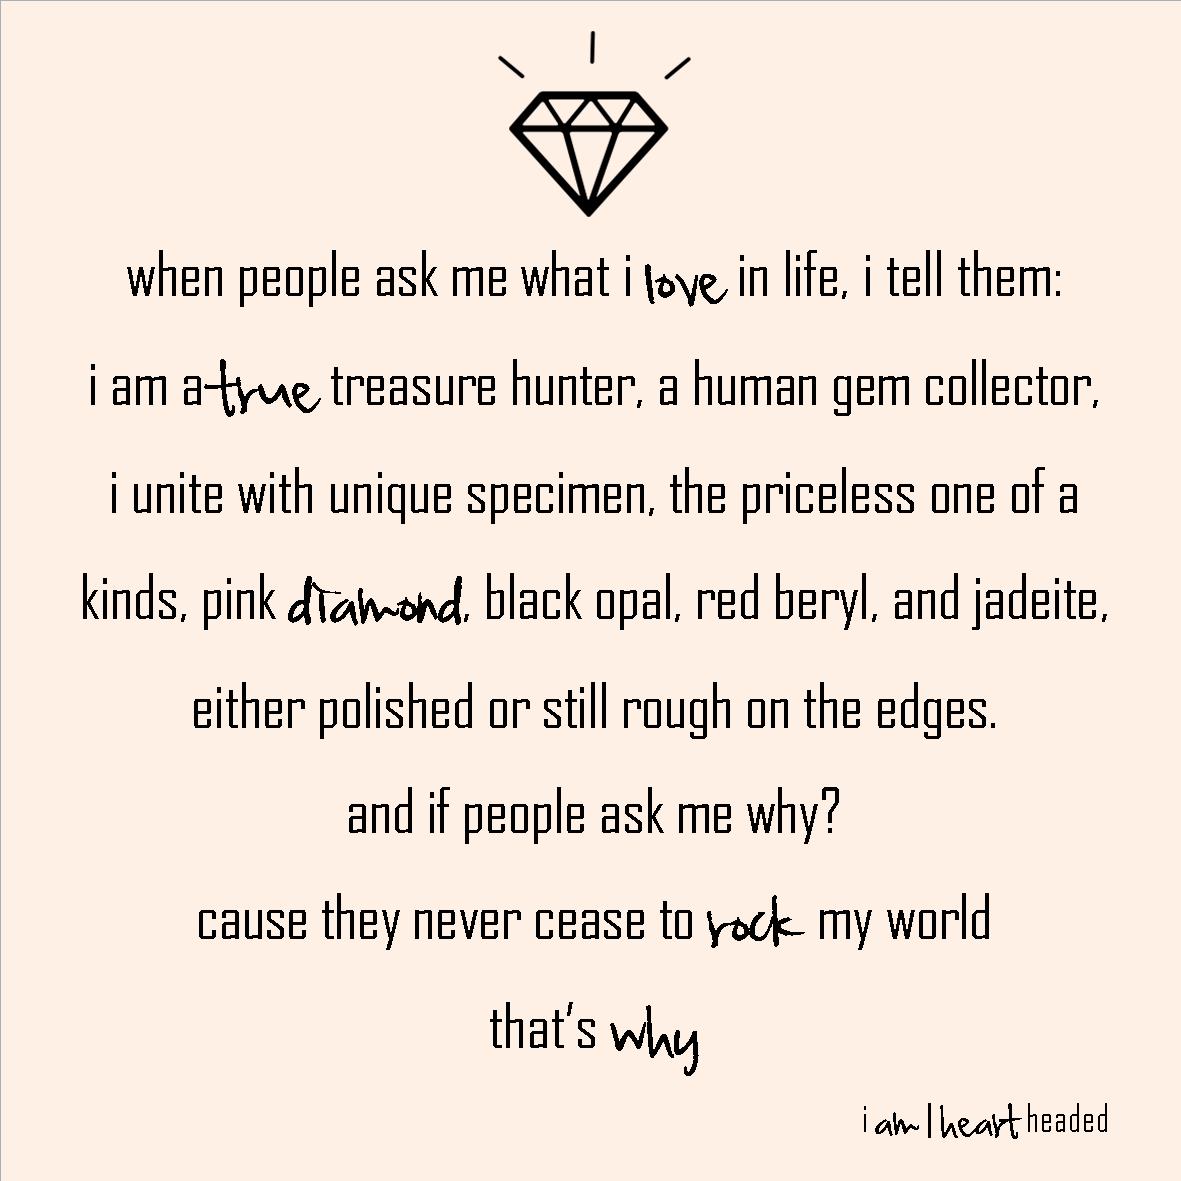 full-size featured image of quote 'true treasure hunter' in category 'sparkly' at i am | heart headed